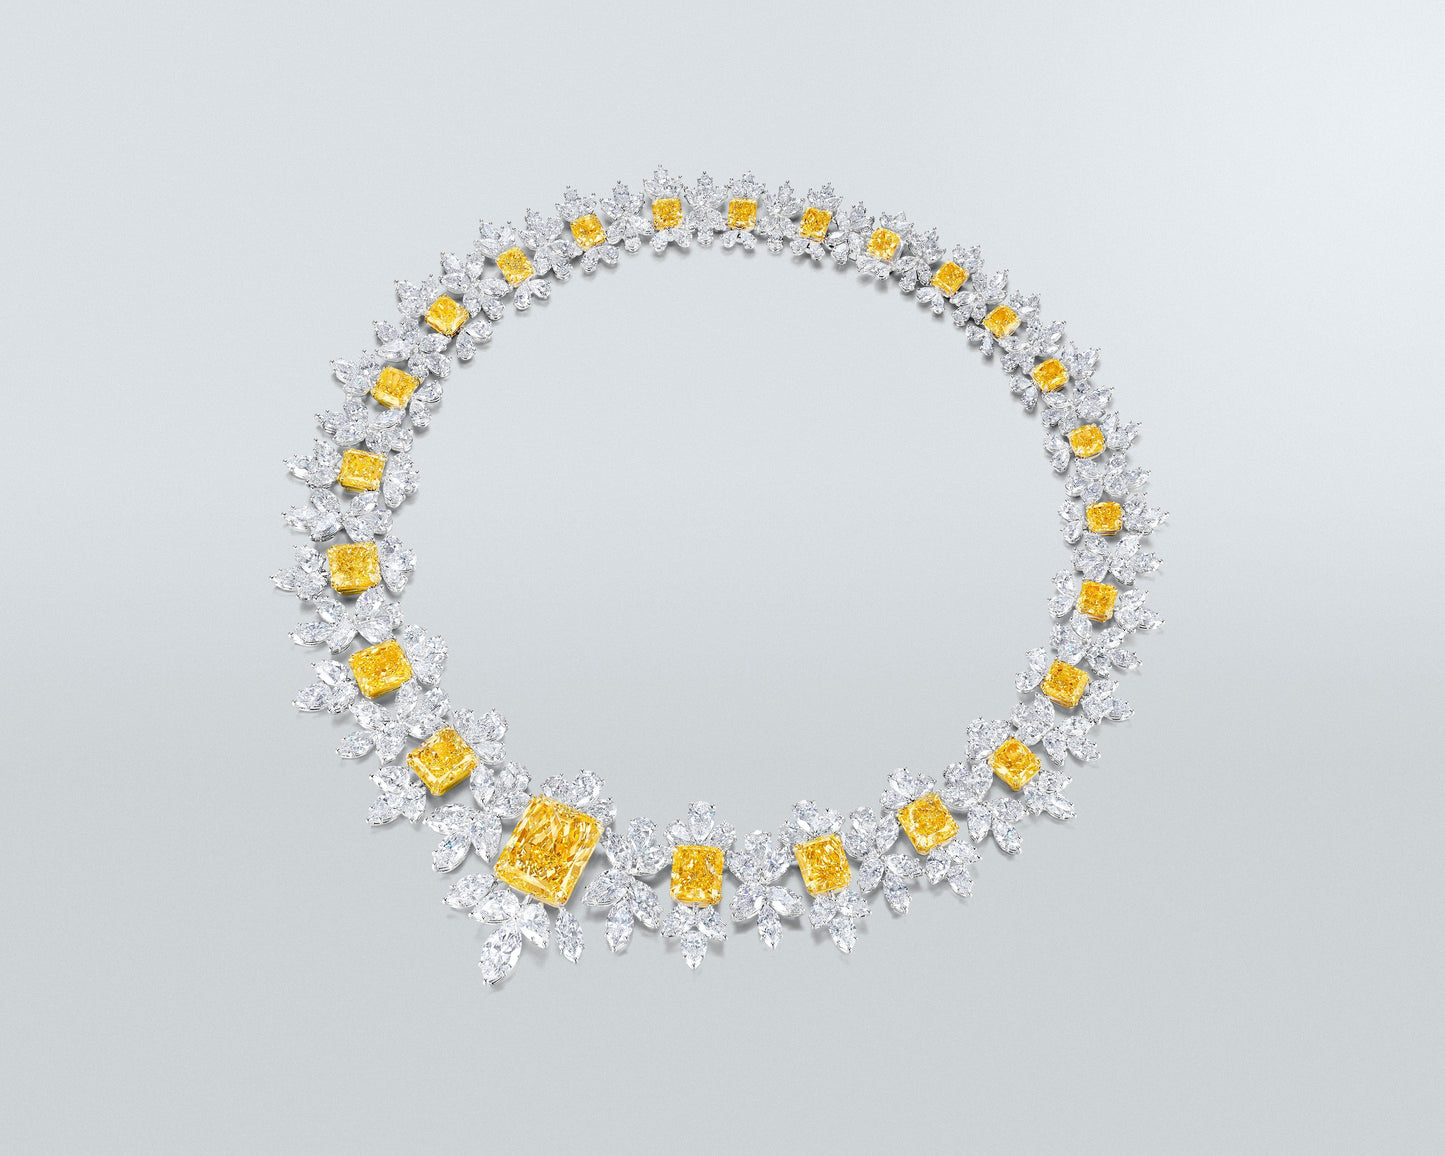 25.88 carat Radiant Cut Fancy Yellow and White Diamond Necklace